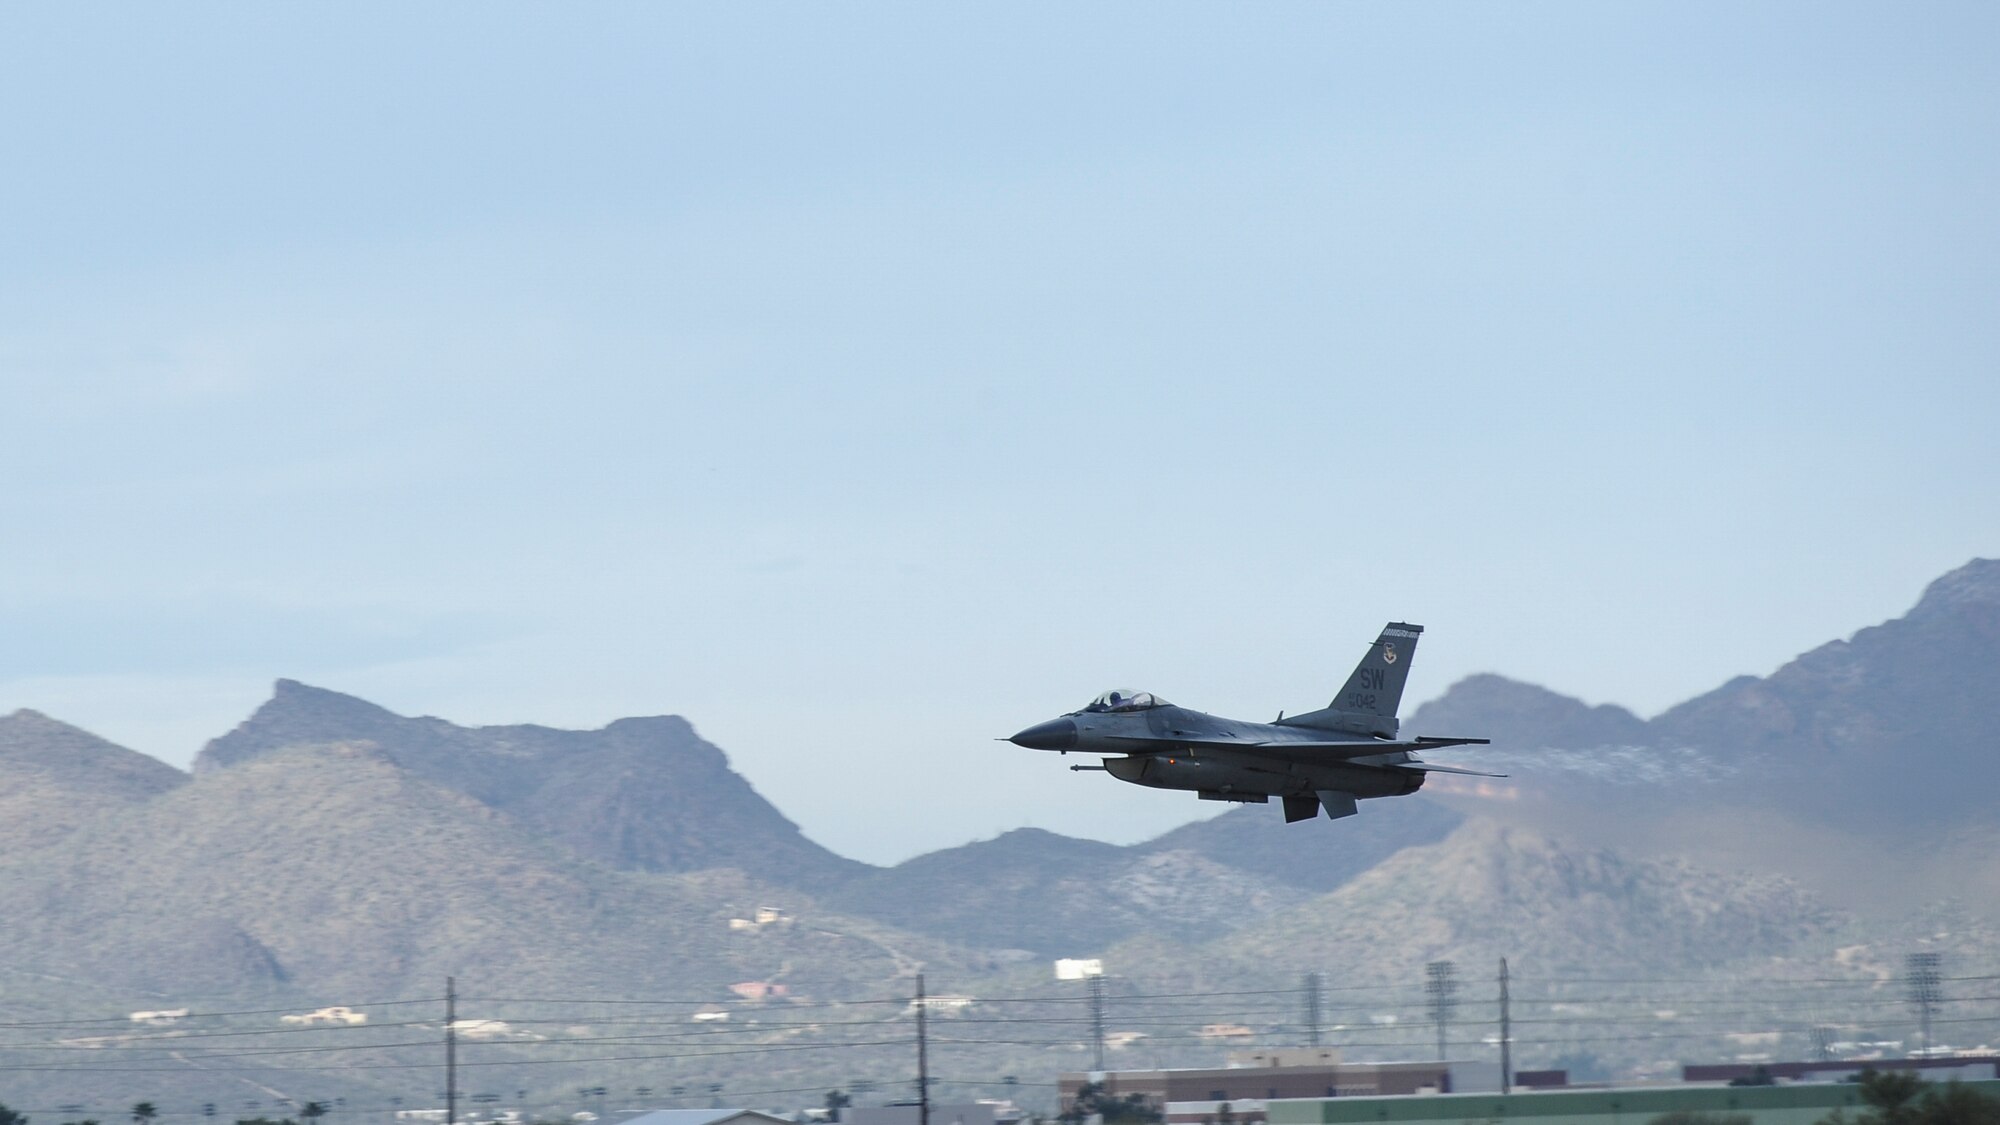 A U.S. Air Force F-16C Fighting Falcon takes off during the 2017 Heritage Flight Training and Certification Course at Davis-Monthan Air Force Base, Ariz., Feb. 12, 2017. The modern aircraft that participated in this year's HFTCC were the F-35 Lightning II, the F-22 Raptor, the F-16 Fighting Falcon and the A-10C Thunderbolt II. (U.S. Air Force photo by Airman 1st Class Mya M. Crosby)